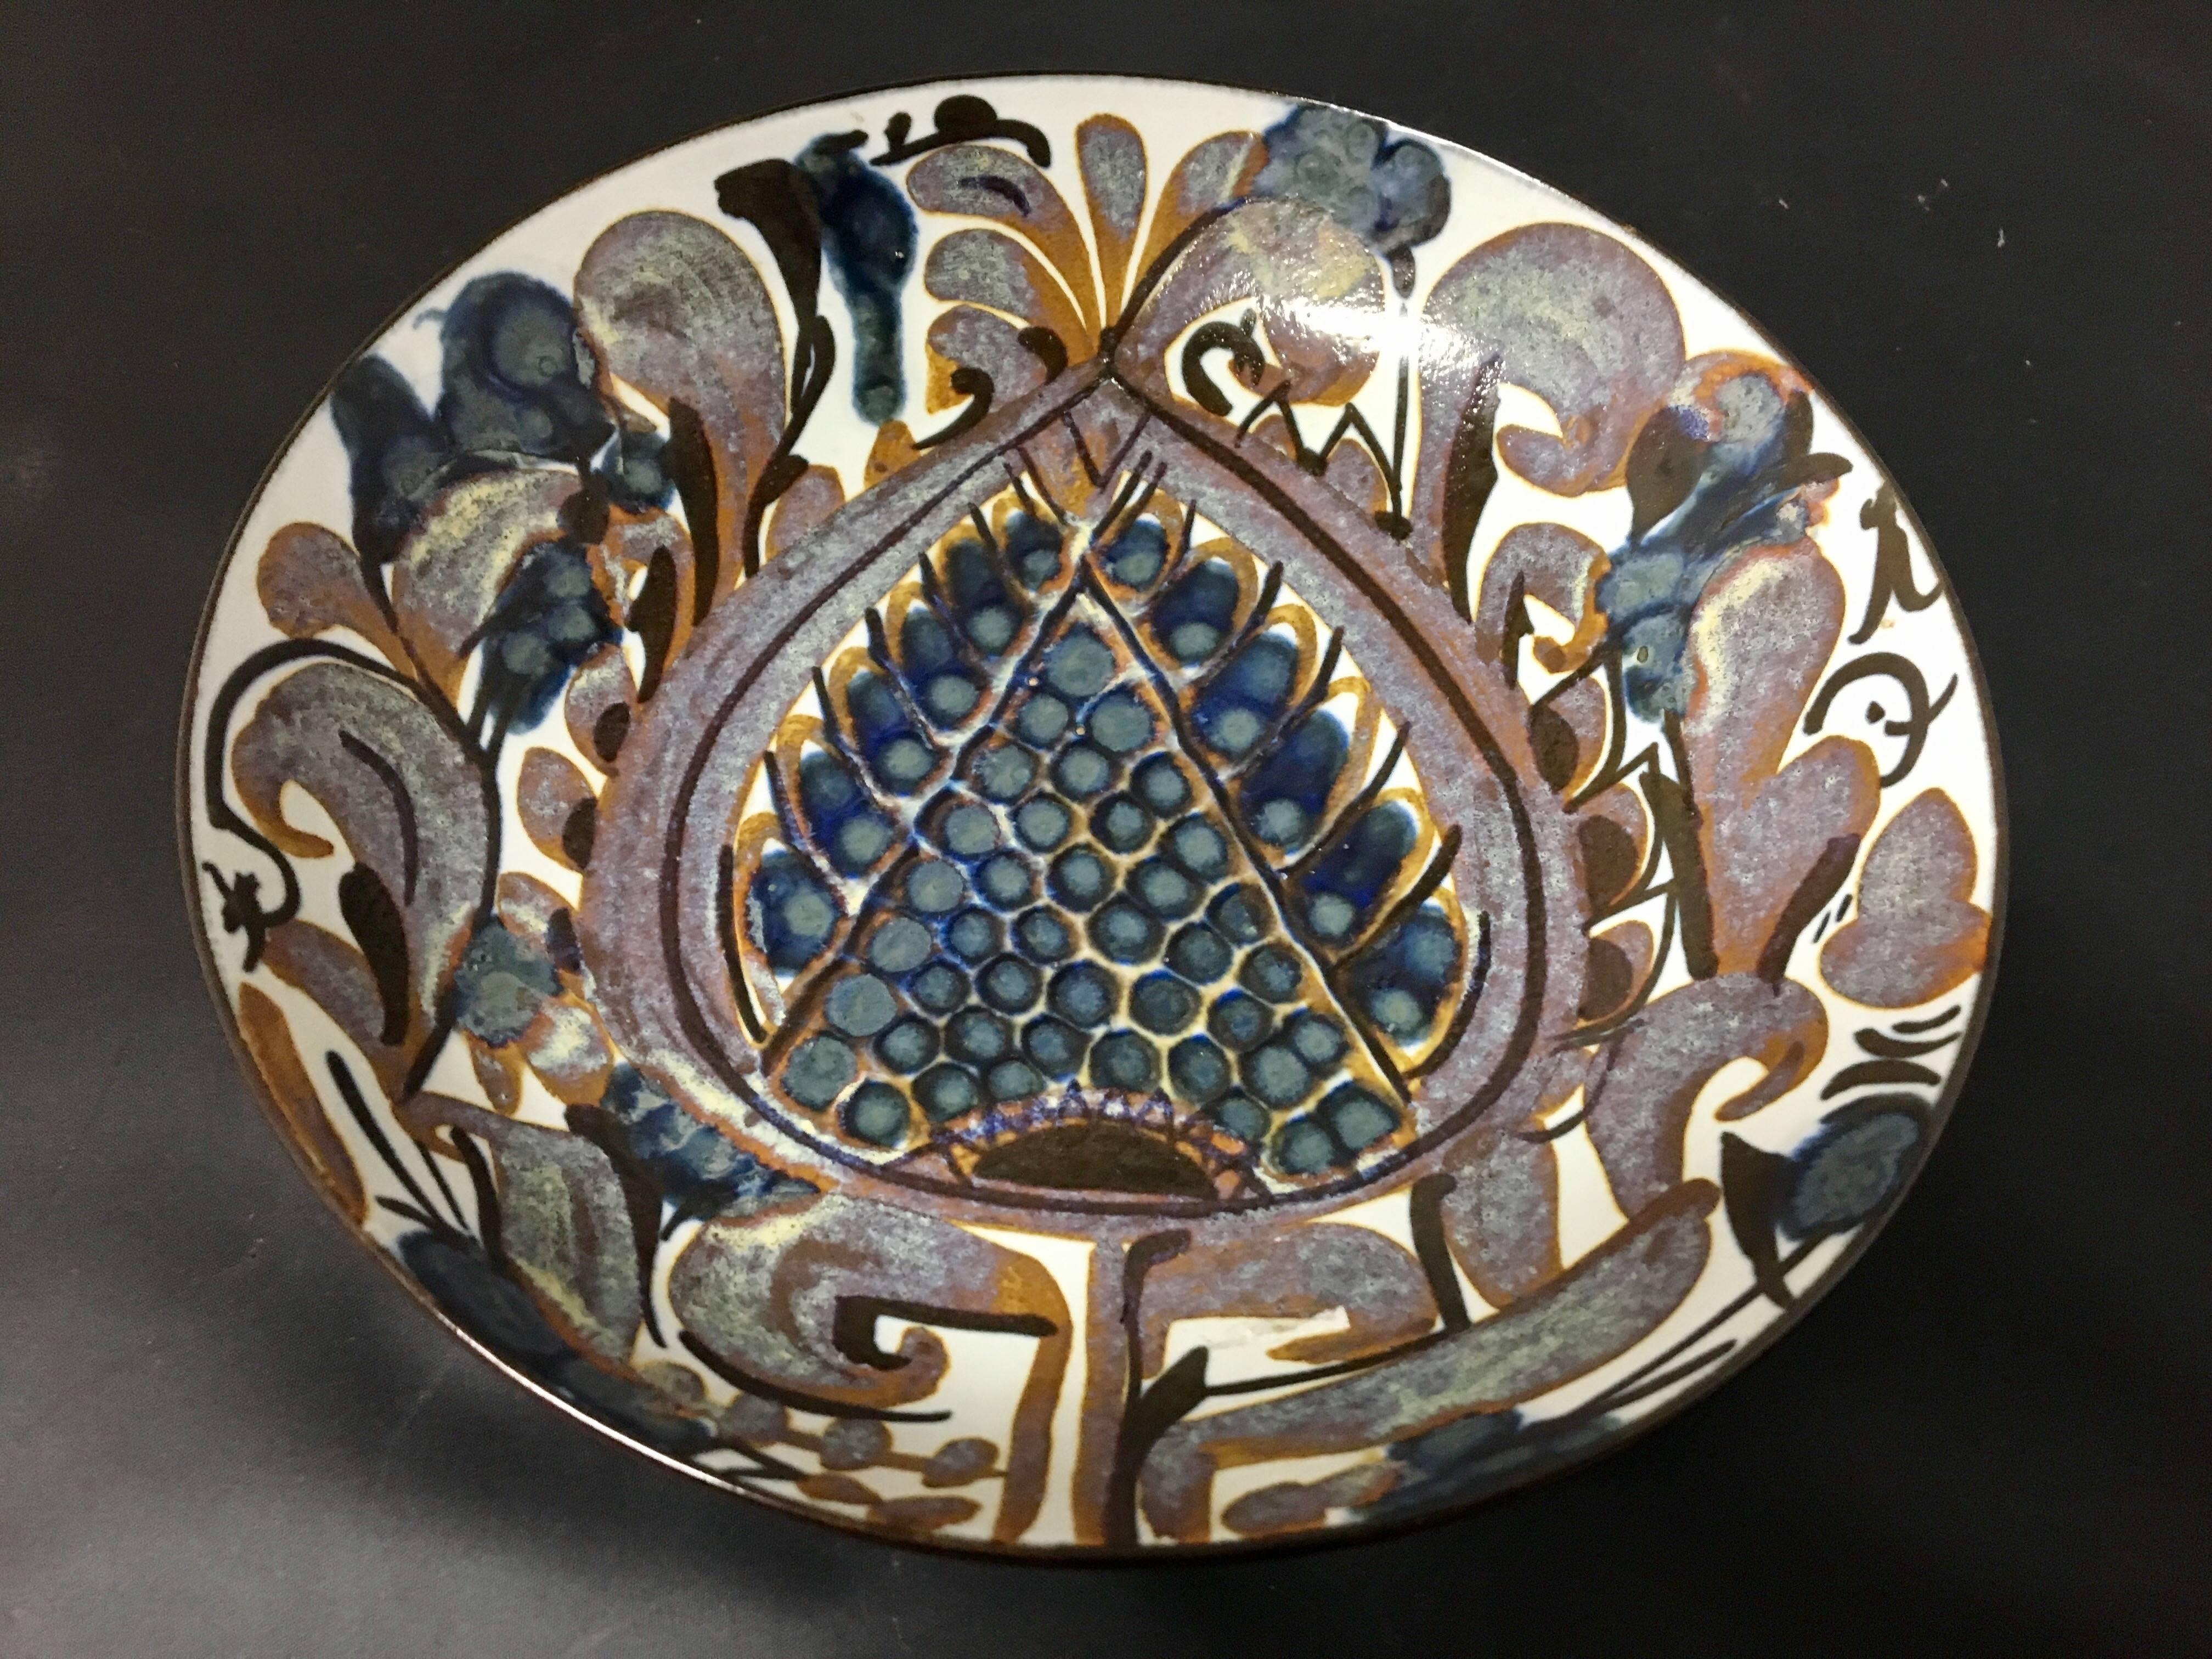 Elegant pattern on this bowl designed by Kari Christiansen for Royal Copenhagen. The piece is signed and numbered and in excellent condition with no chips cracks or scratches.